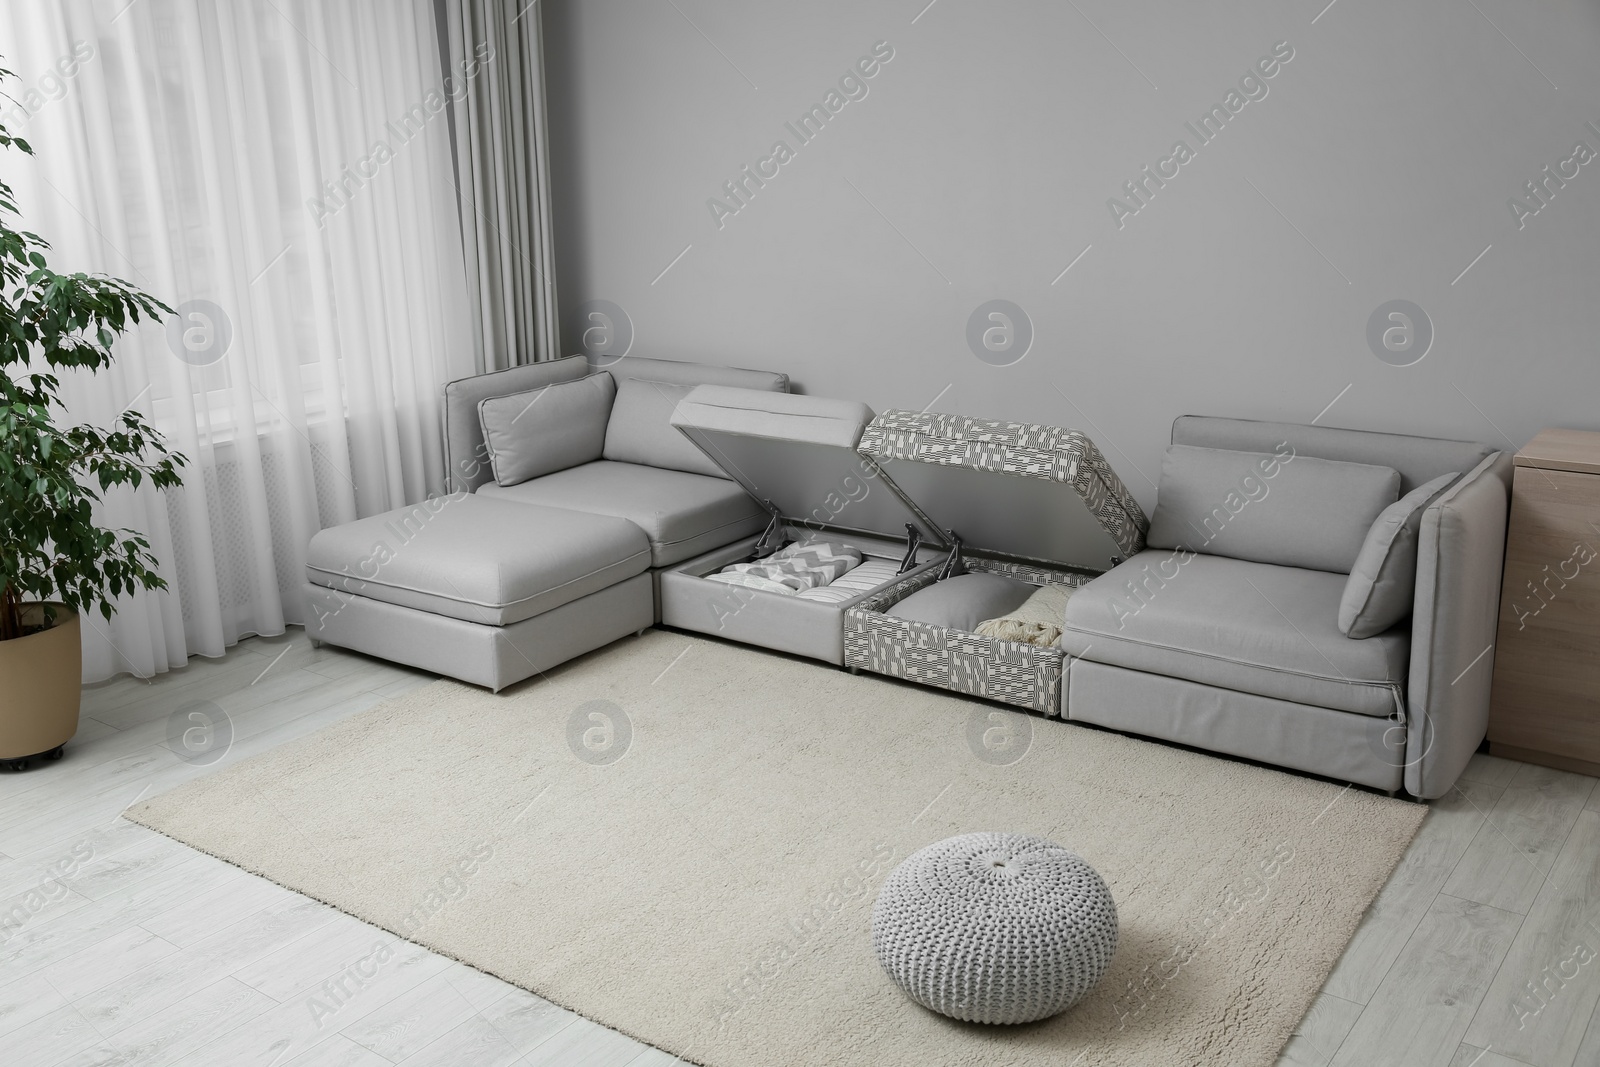 Photo of Modular sofa with storage near wall in living room. Interior design